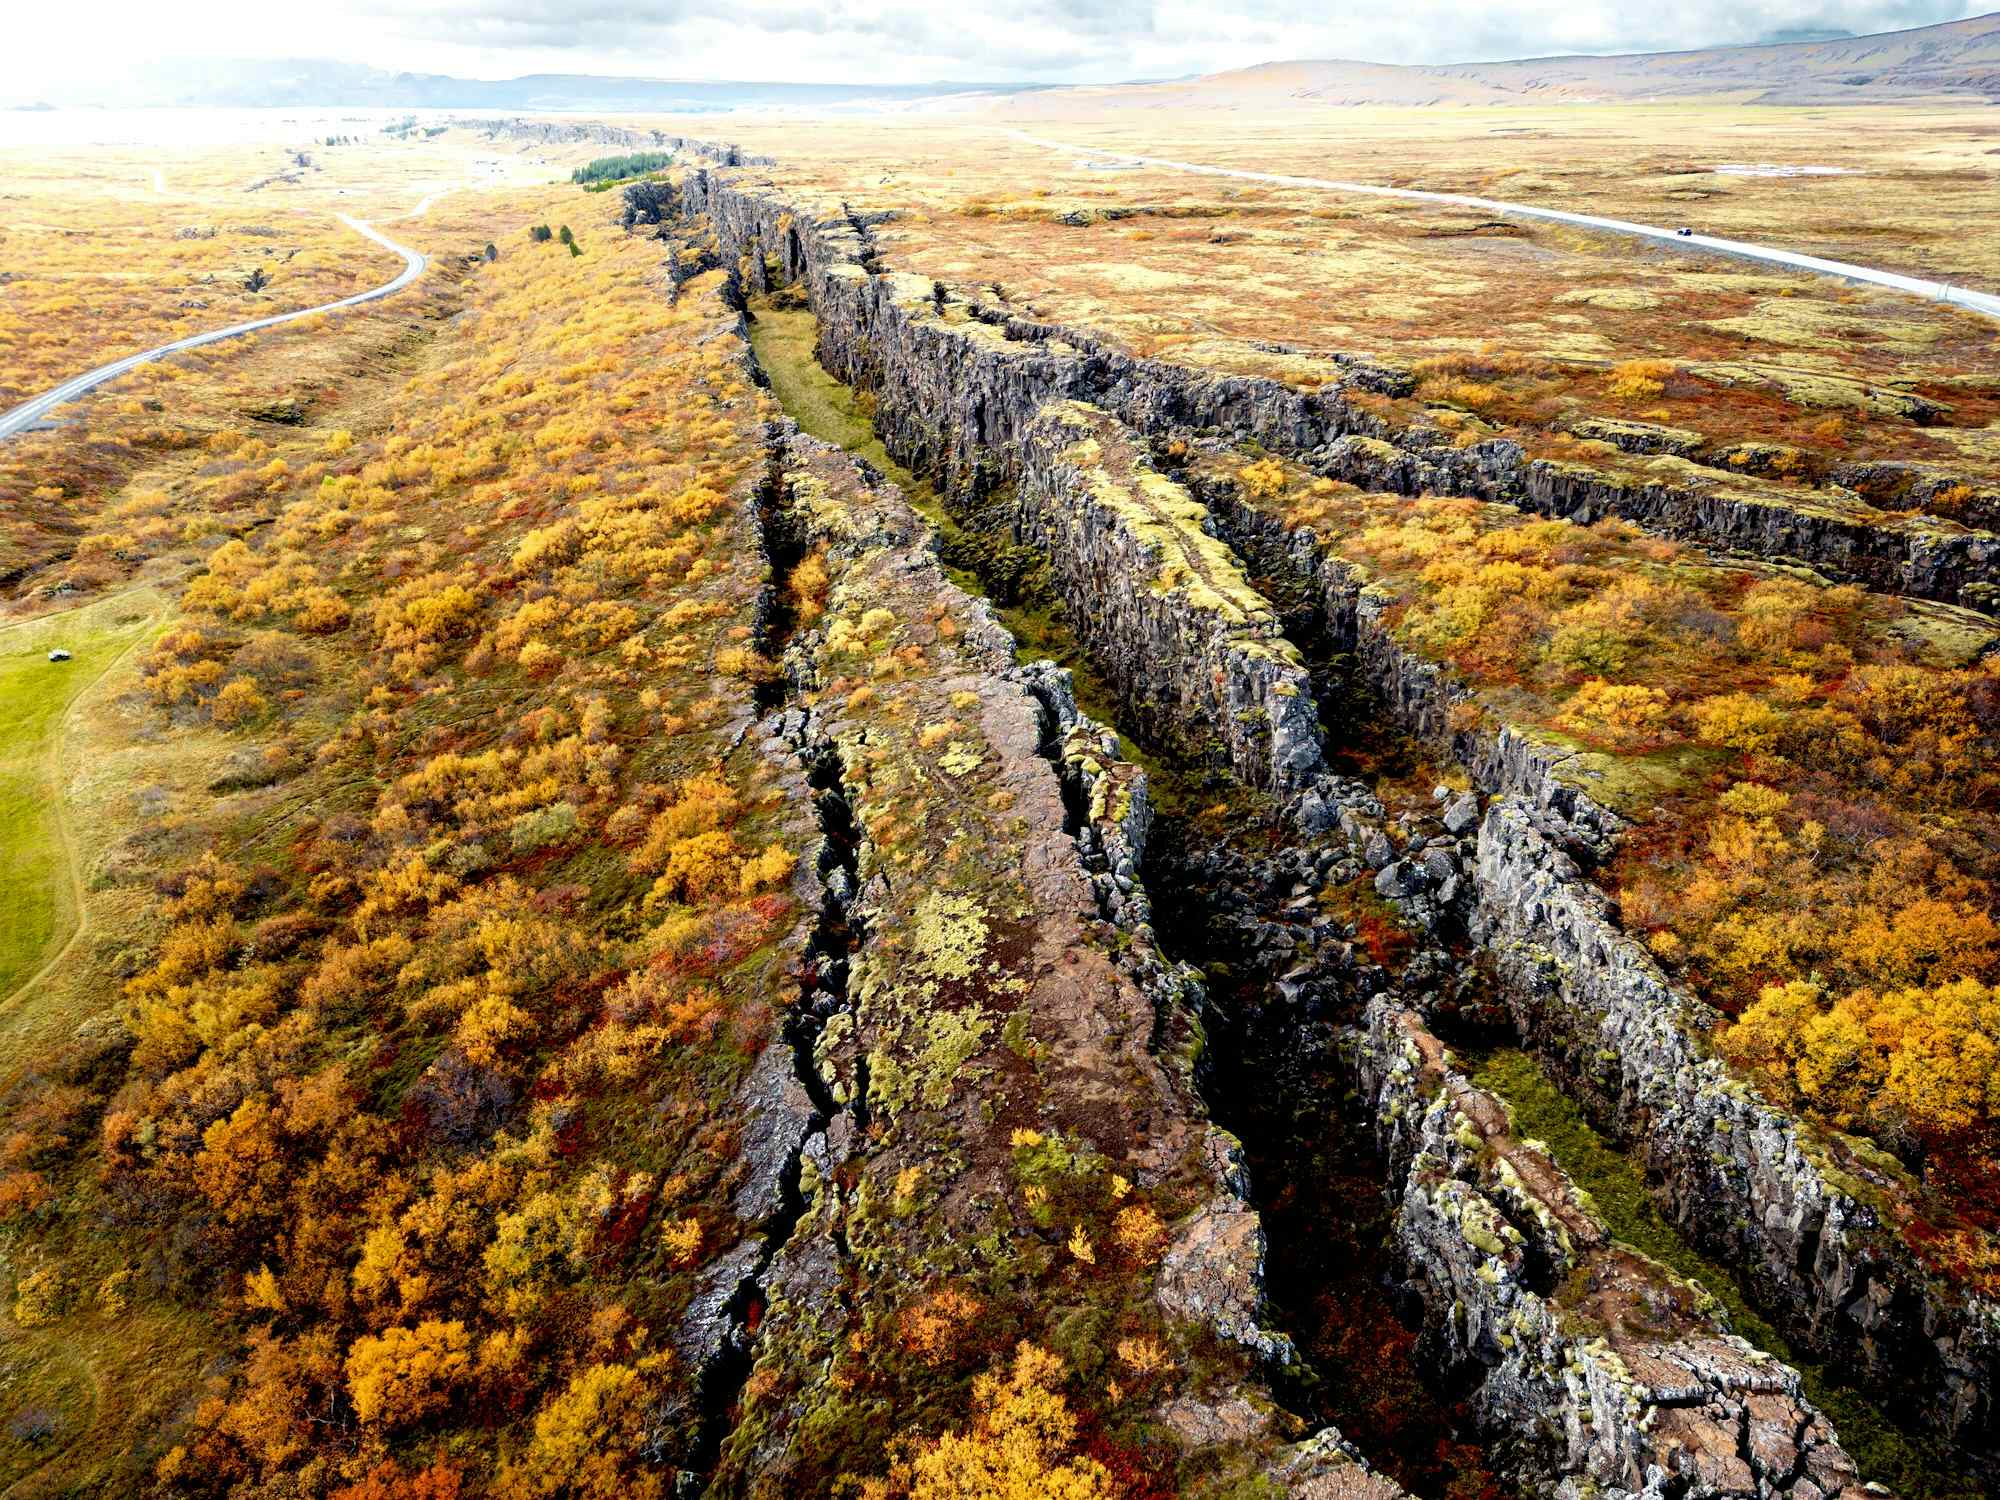 Fissure between the two tectonic plates in Iceland at Thingvellir